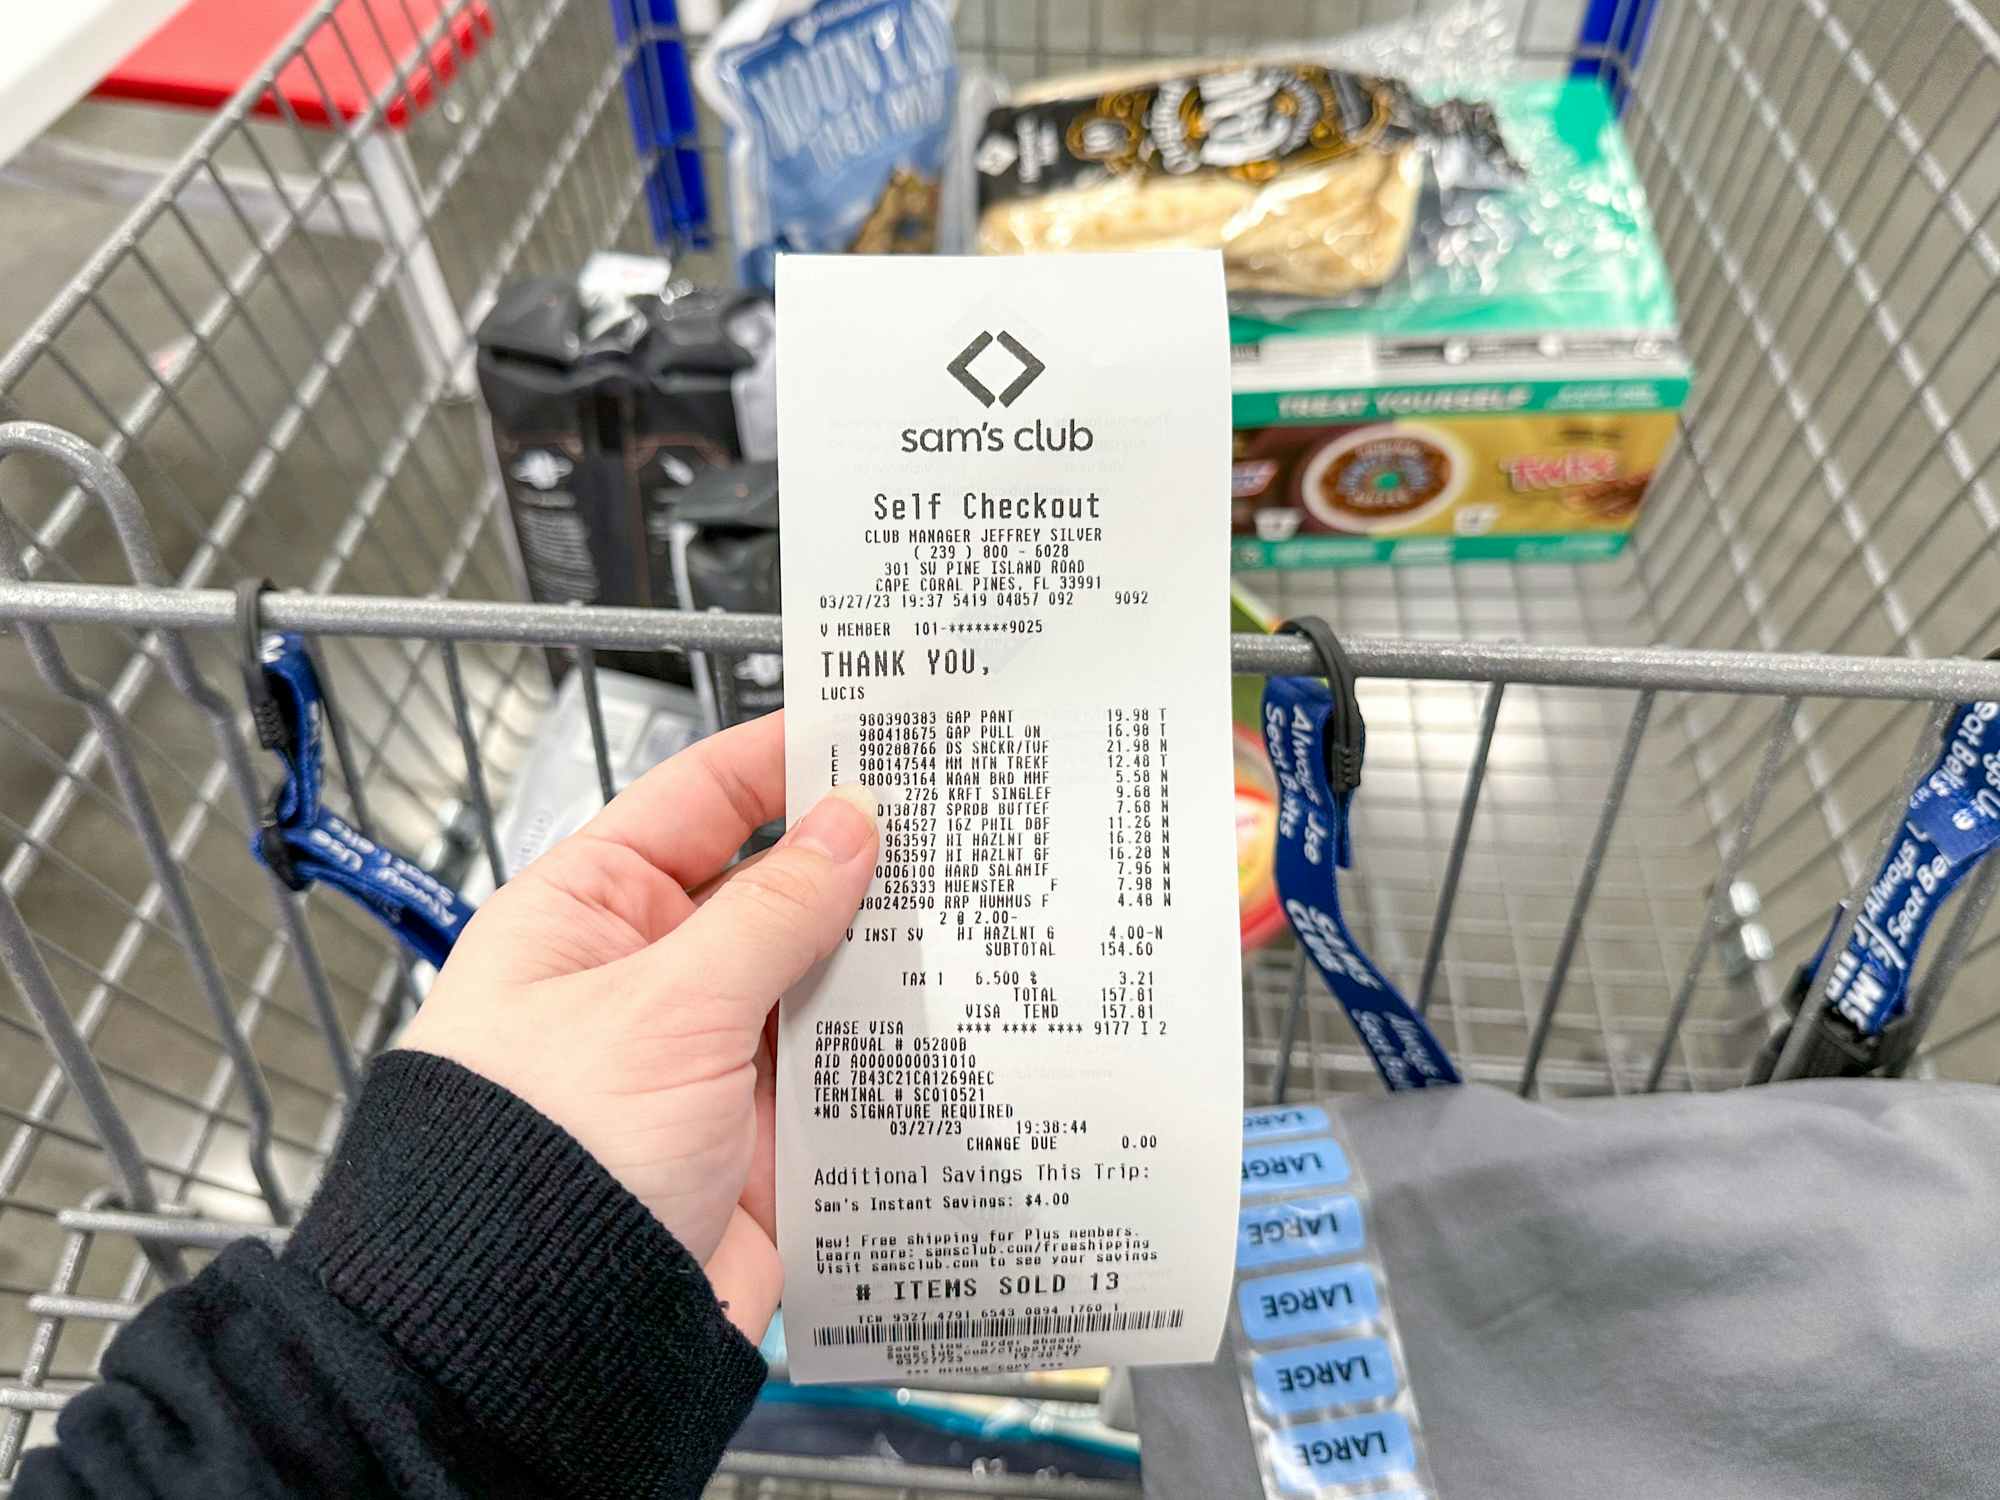 Someone holding their receipt in front of a Sam's Club cart